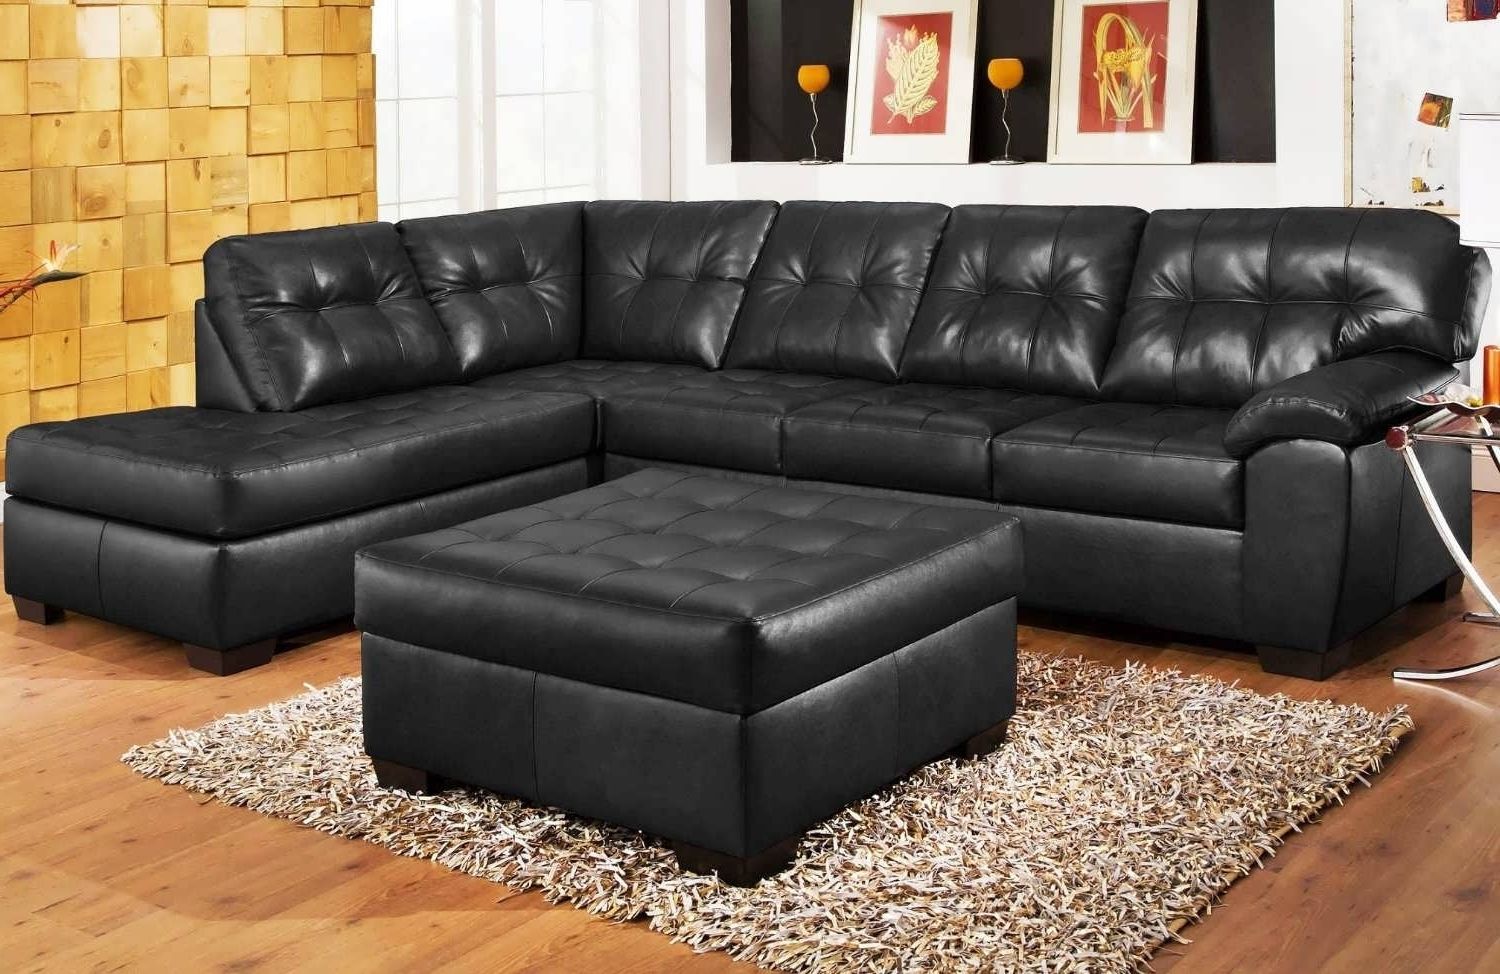 black leather moden sectional sofa chaise vig furniture